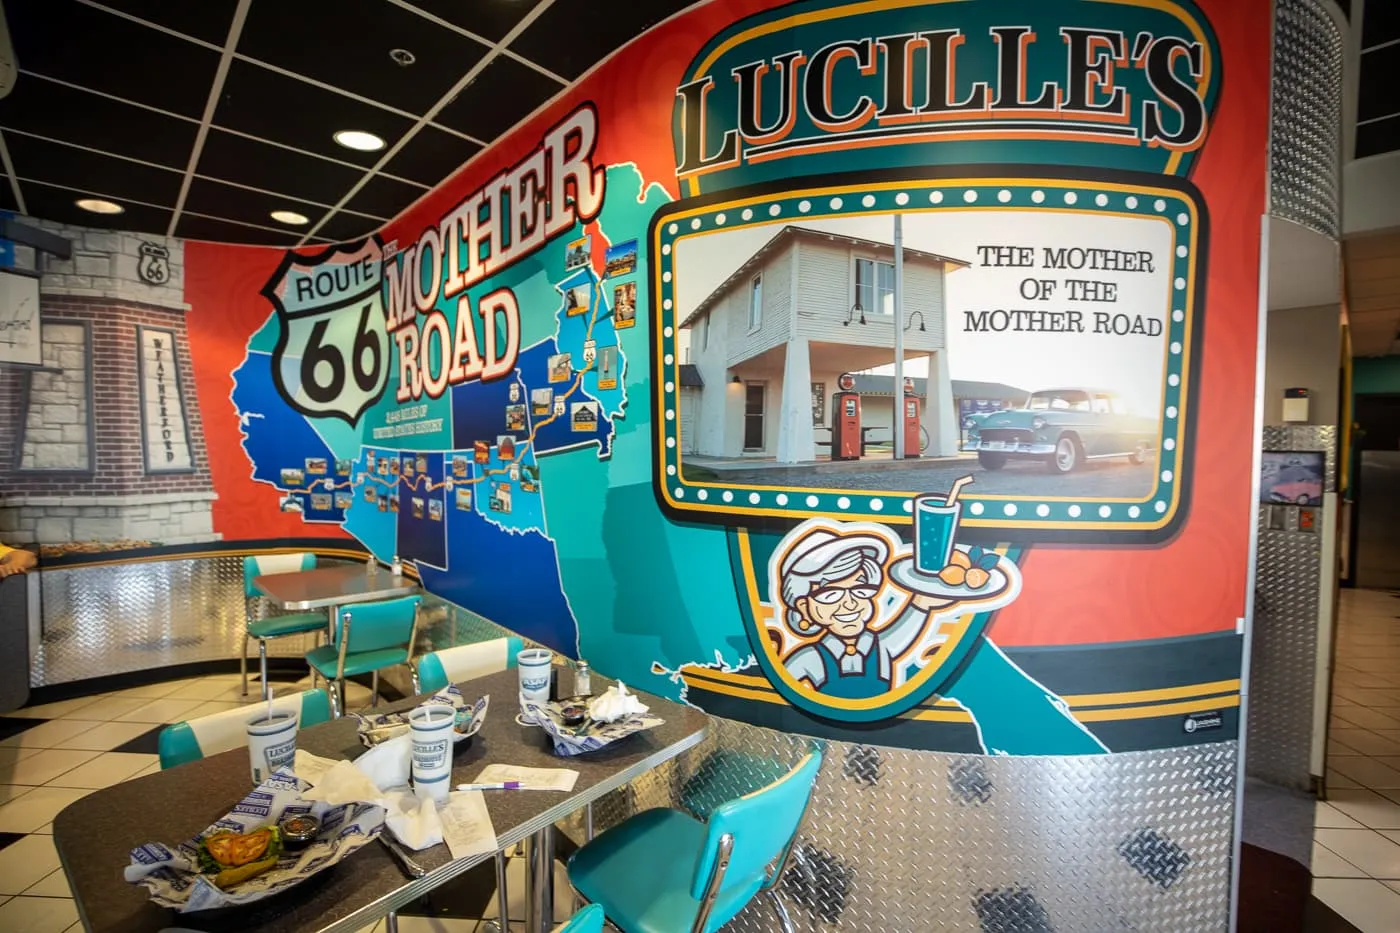 Route 66 Mother Road mural at Lucille’s Roadhouse Diner in Weatherford, Oklahoma Route 66